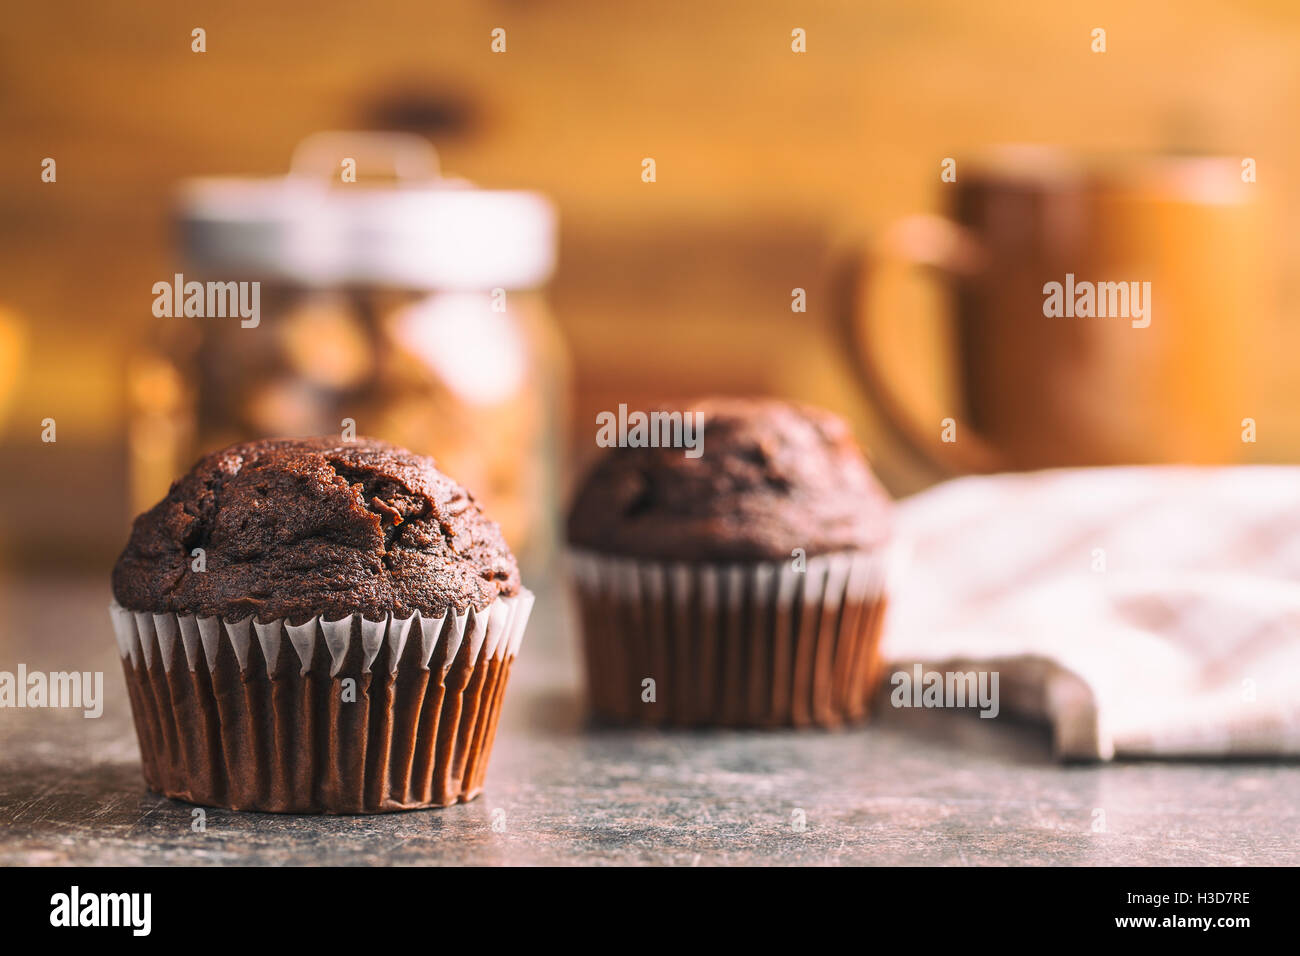 The tasty chocolate muffins on old kitchen table. Stock Photo